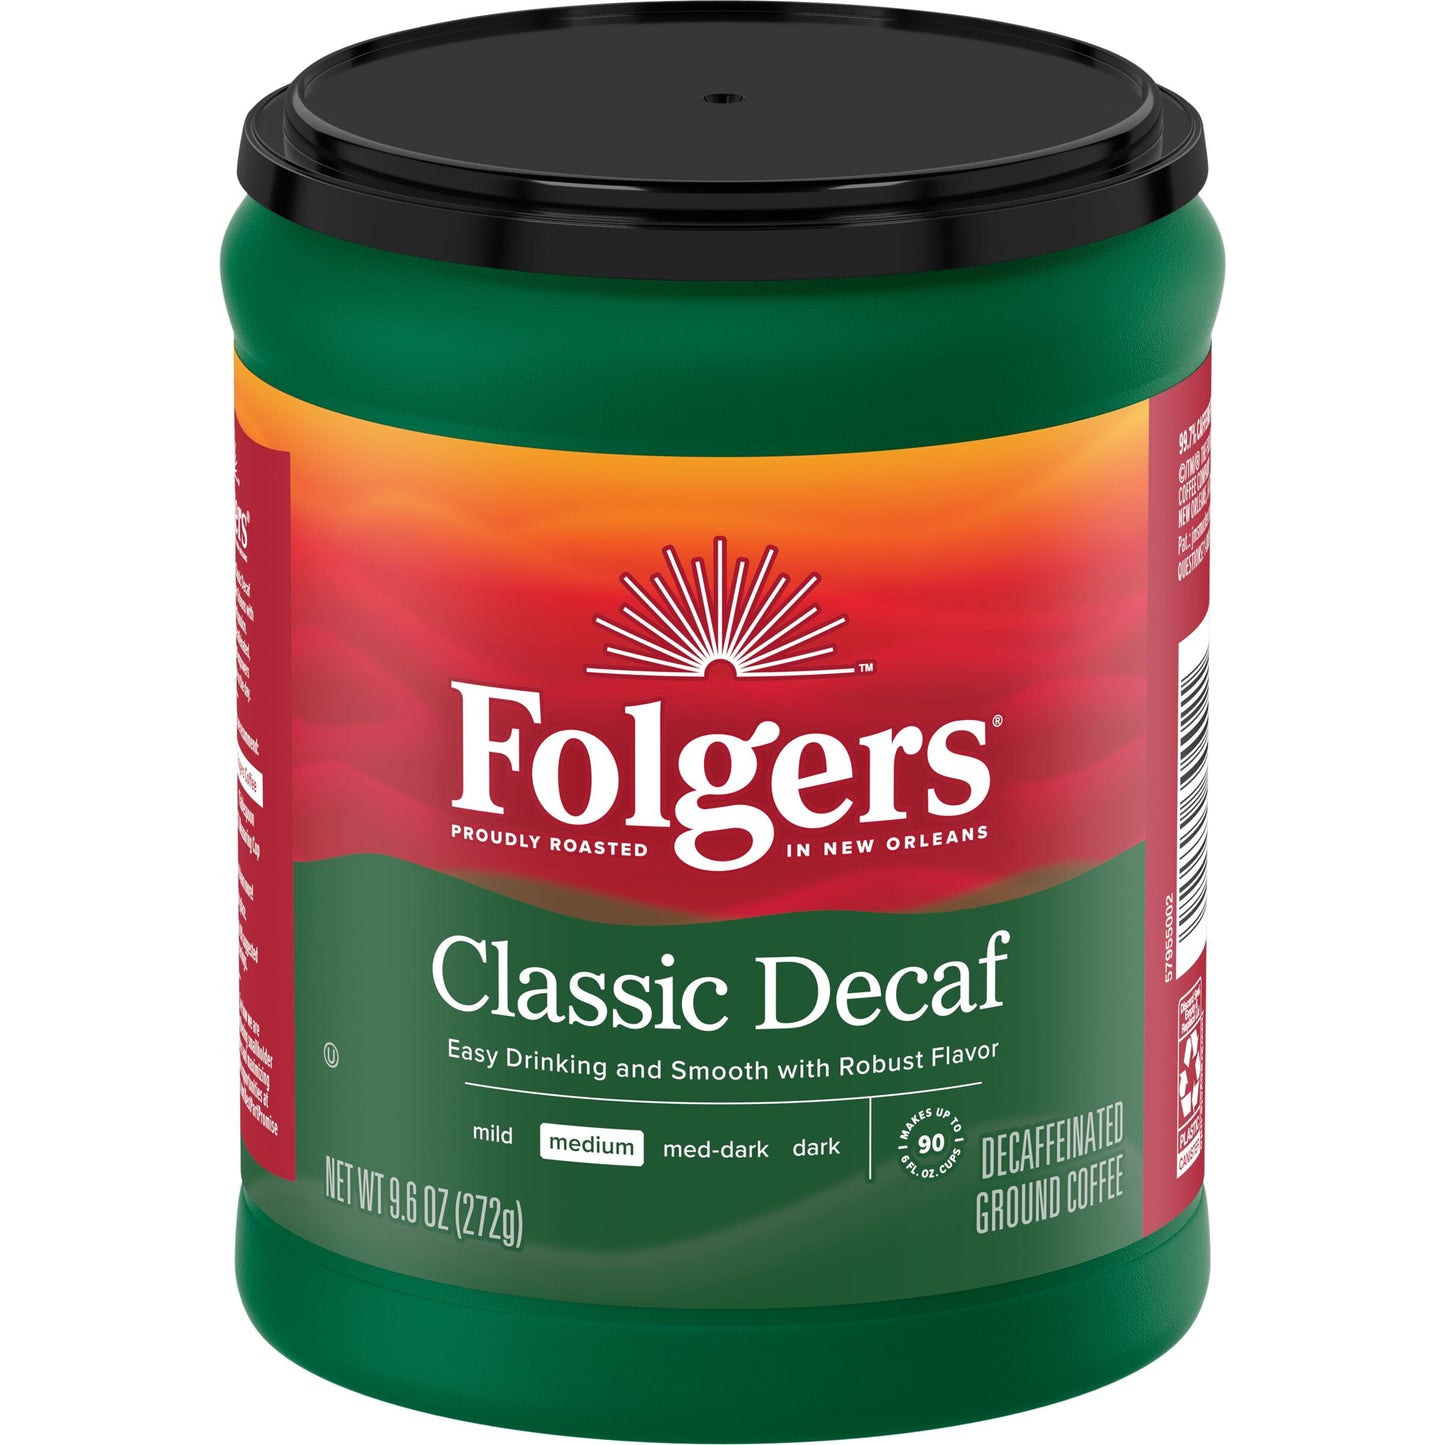 Folgers Decaf Coffee, Ground Coffee, Classic Medium Roast, 9.6 Ounce Canister